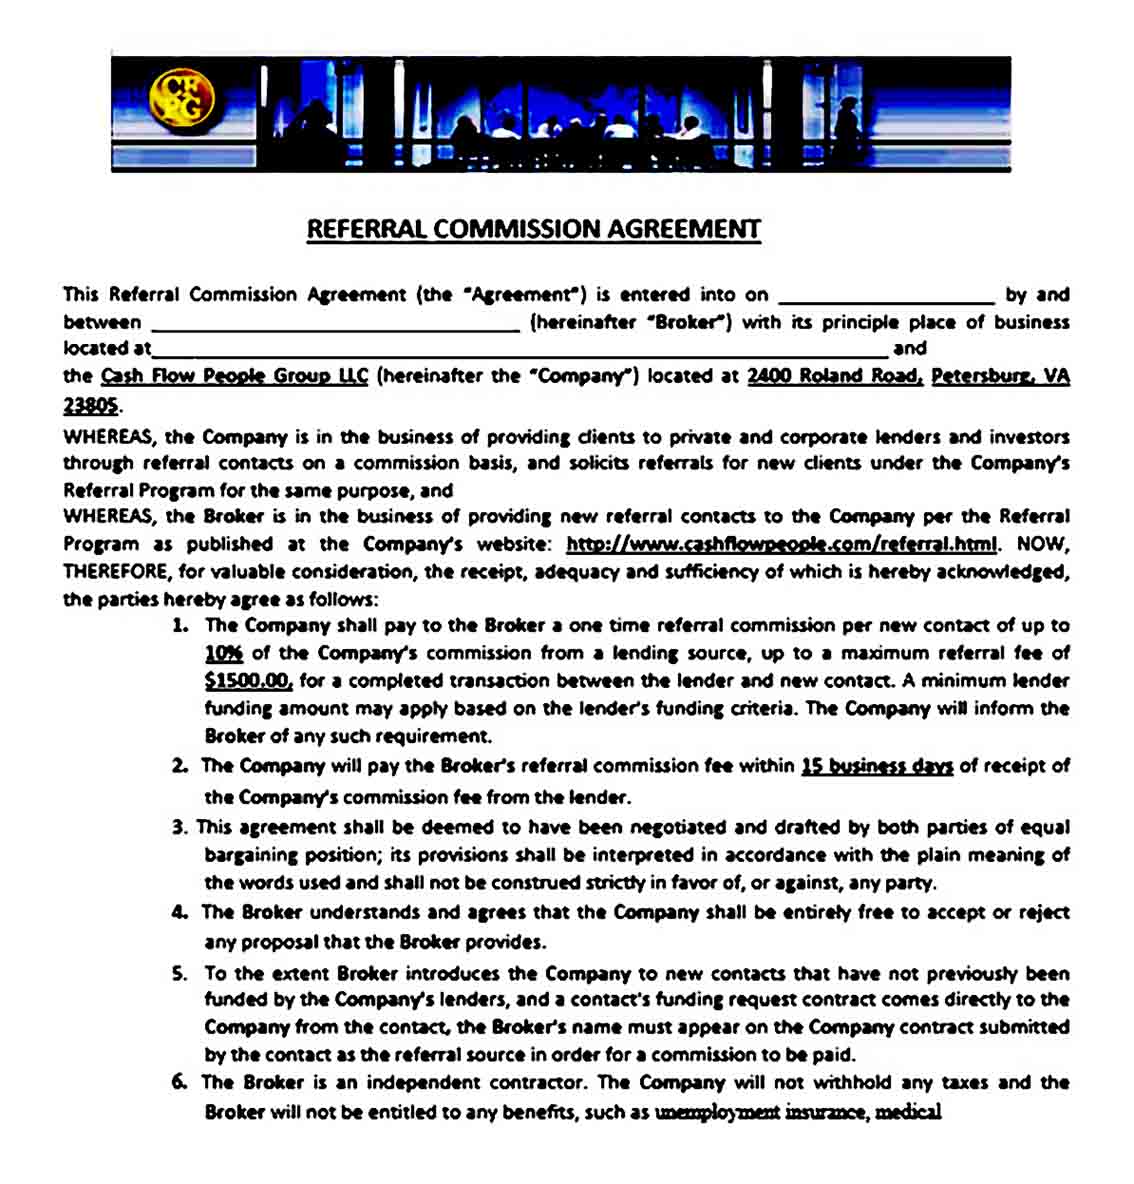 Referral Commission Agreement